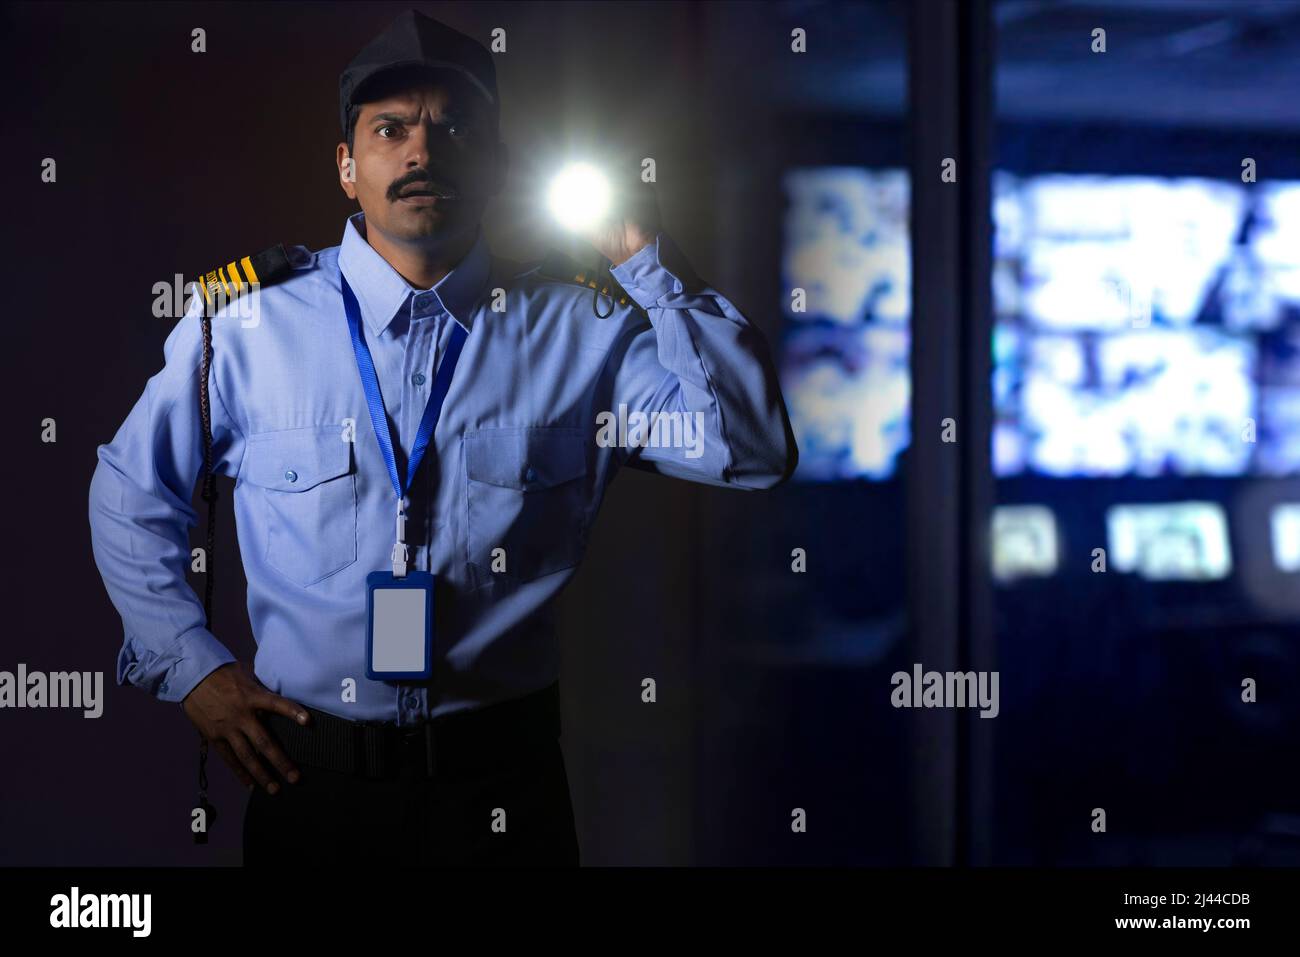 Security guard searching with torch light while working at night Stock Photo